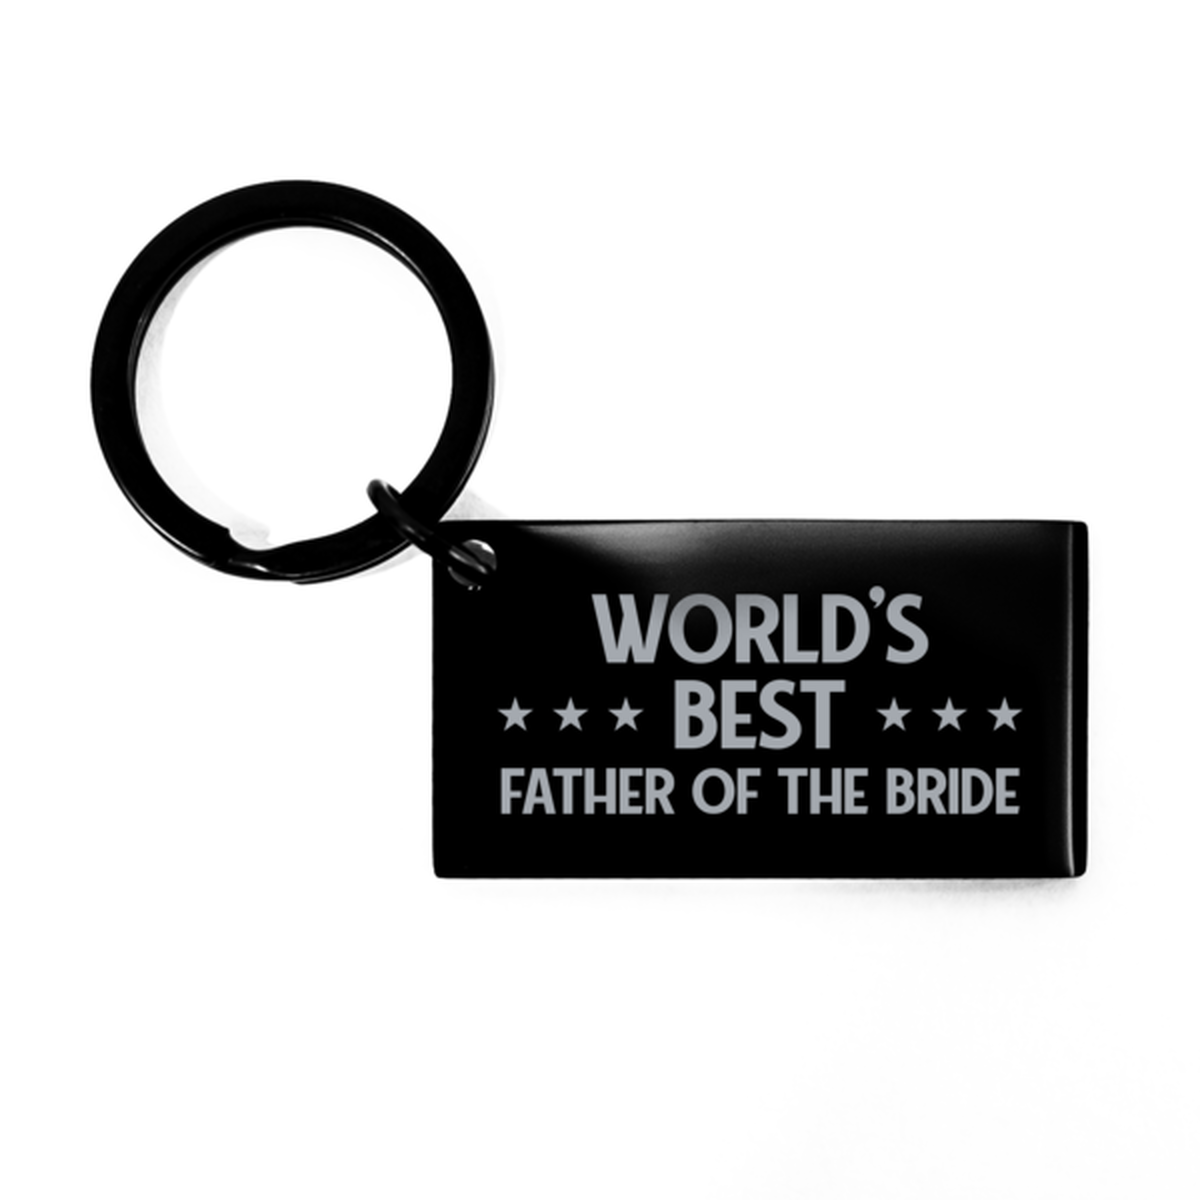 Worlds Best Father of the bride Gifts, Funny Black Engraved Keychain For Father of the bride, Birthday Presents For Men